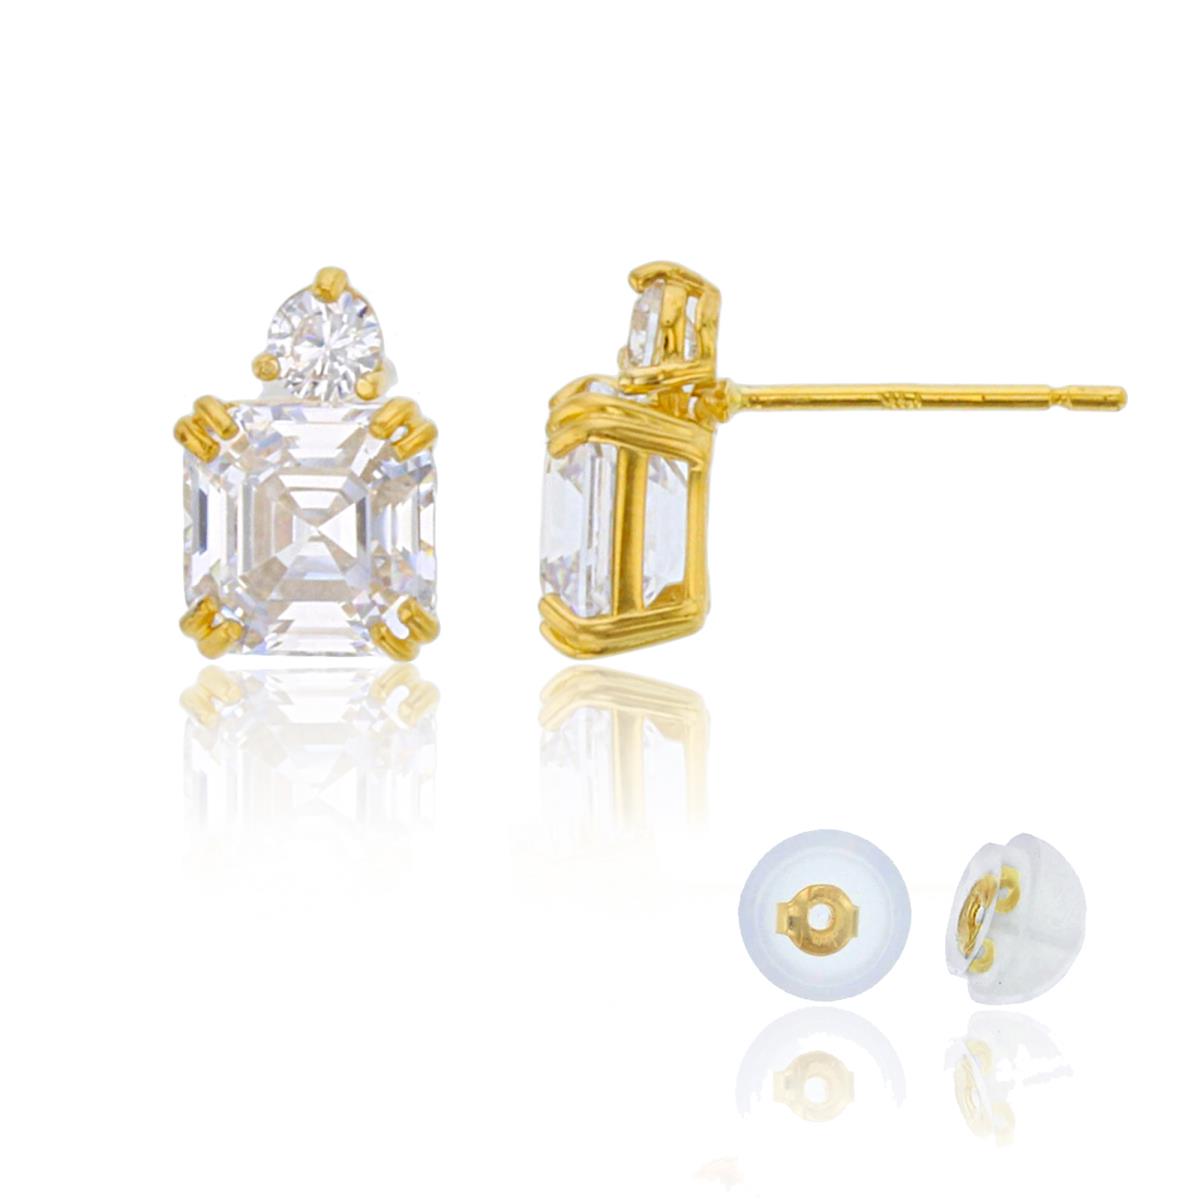 10K Yellow Gold 6mm Cush & Rnd White CZ Solitaire Studs (Silicone Backs)